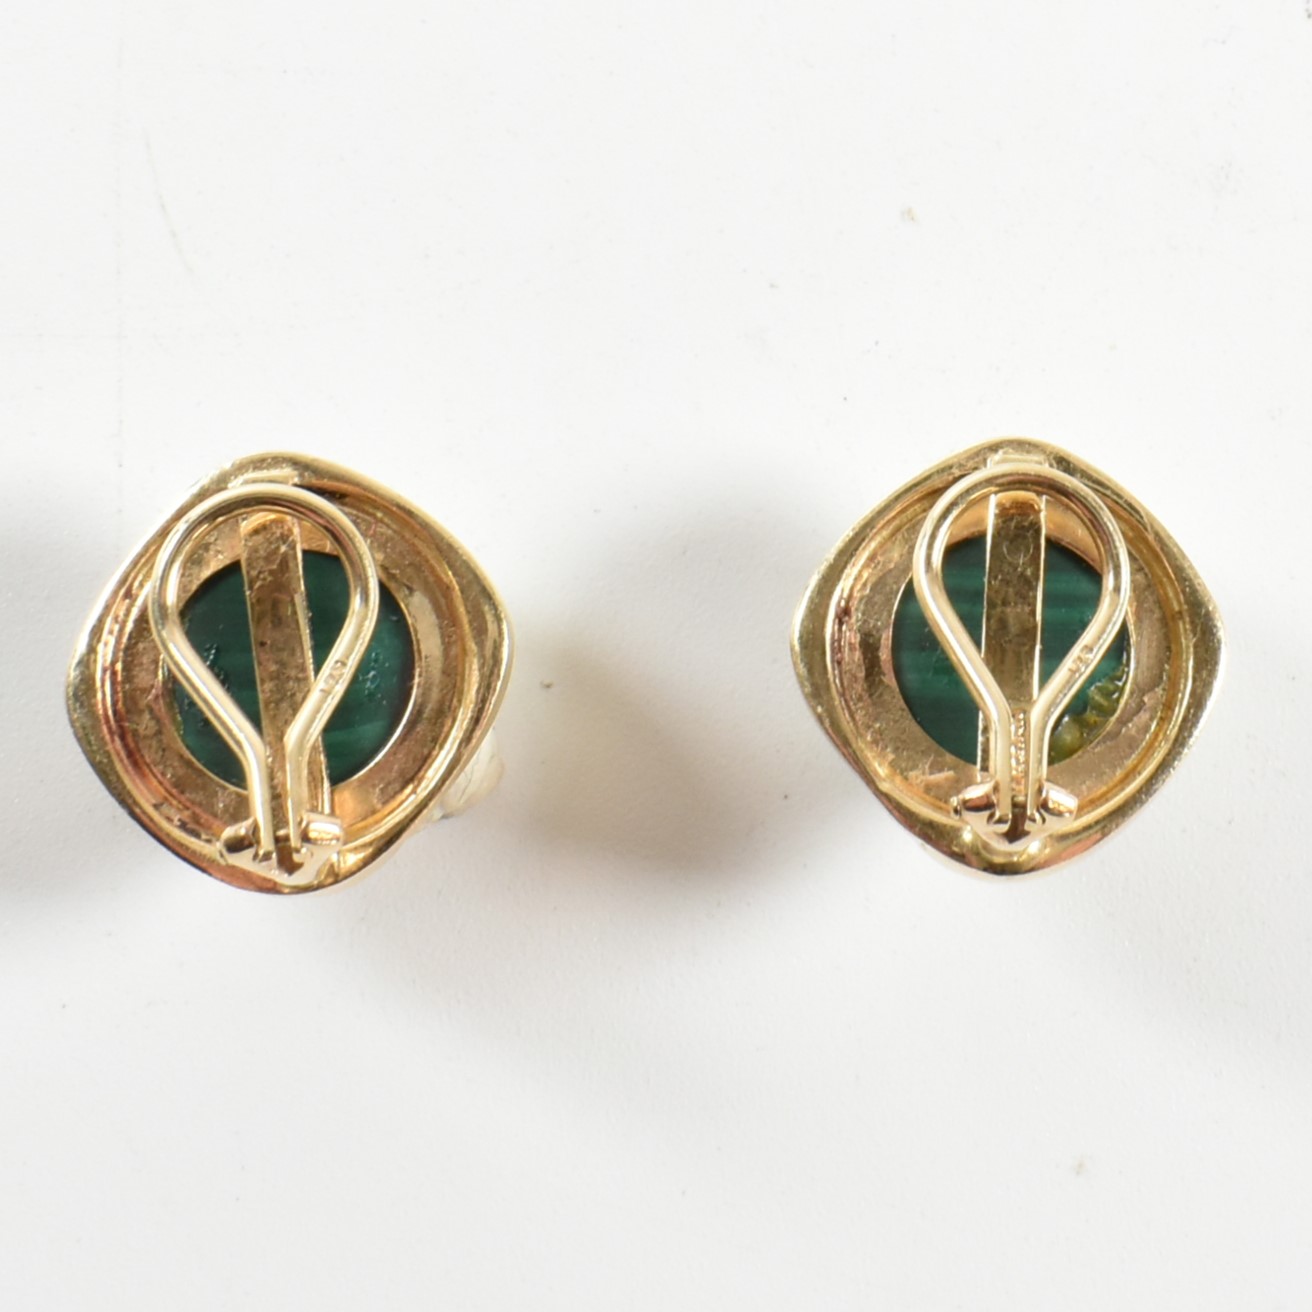 PAIR OF 18CT GOLD & MALACHITE EARCLIP EARRINGS - Image 2 of 4